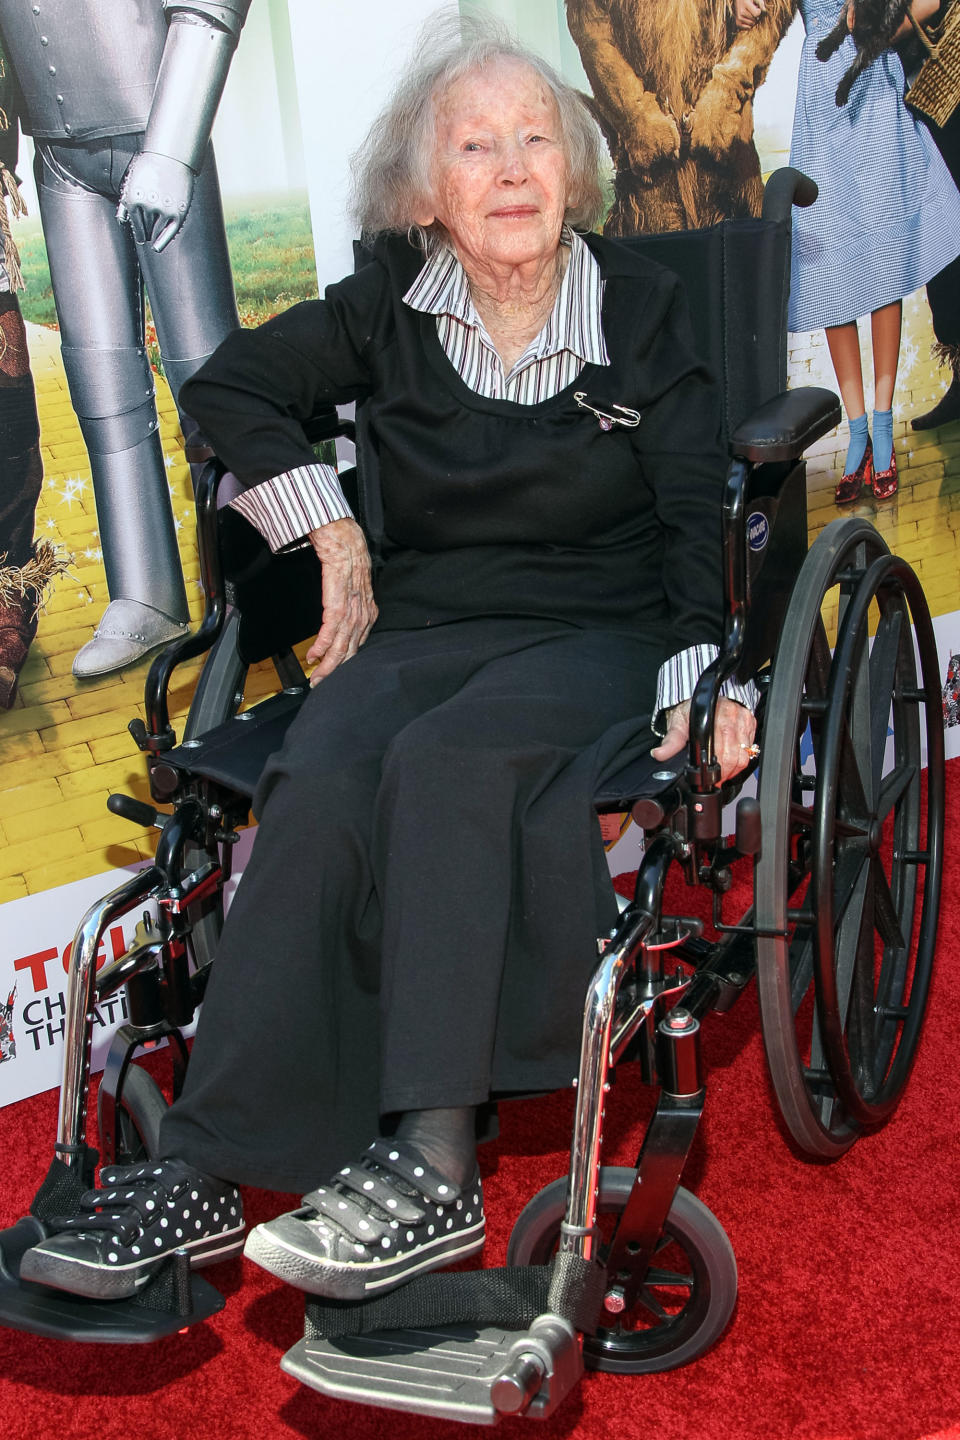 FILE - In this Sept. 15, 2013 file photo, actress Ruth Duccini arrives at the world premiere of "Wizard of Oz" 3D at the TCL Chinese Theatre, in Los Angeles. Ruth Robinson Duccini, one of the original Munchkins from the 1939 movie "The Wizard of Oz," has died, Thursday, Jan. 16, 2014. She was 95. (Photo by Paul A. Hebert/Invision/AP, File)